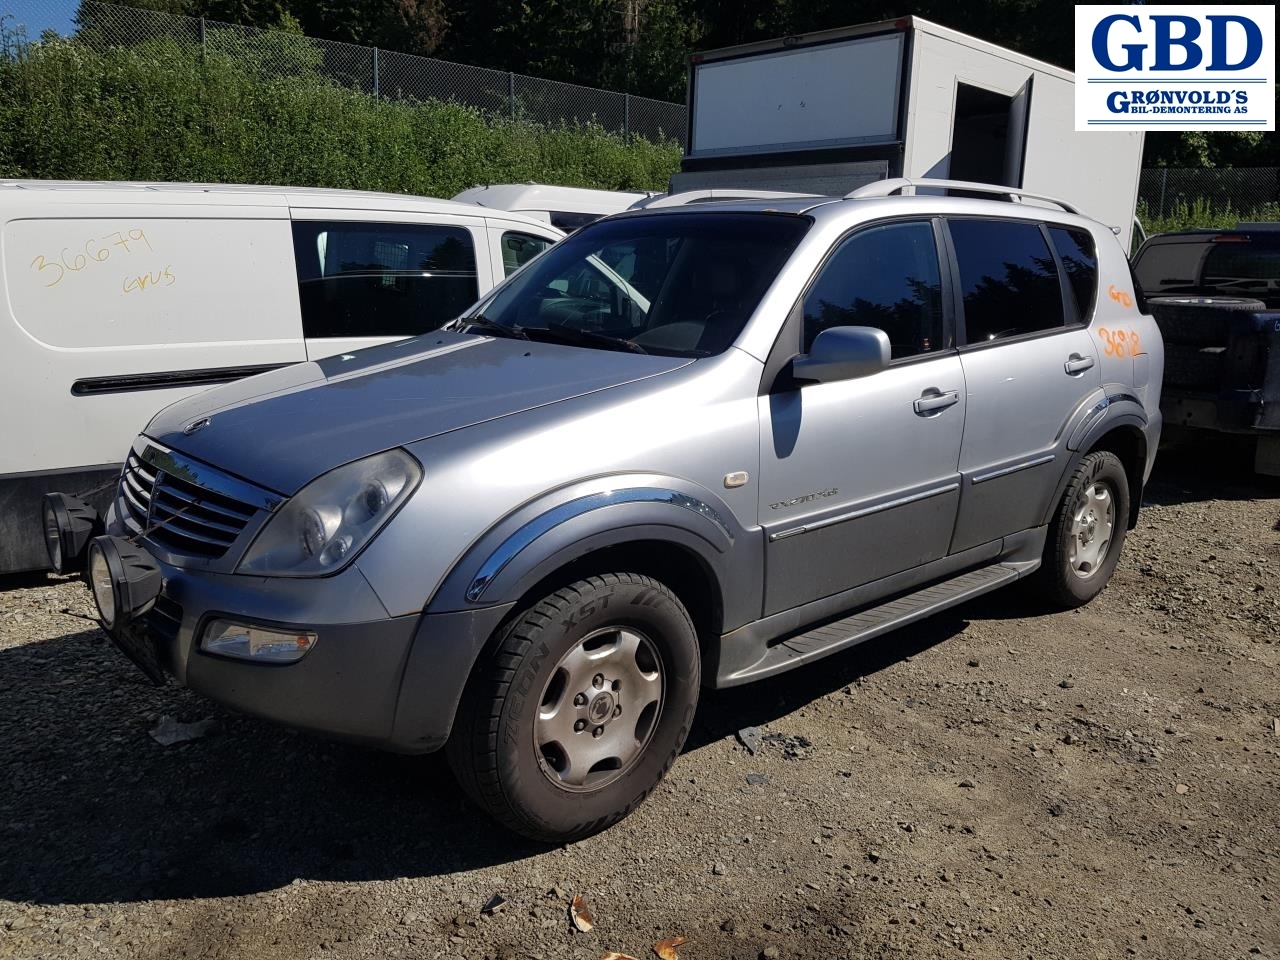 SsangYong Rexton, 2004-2006 (Y200, Fase 2) parts car, Engine code: D27R-056, Gearbox code: 